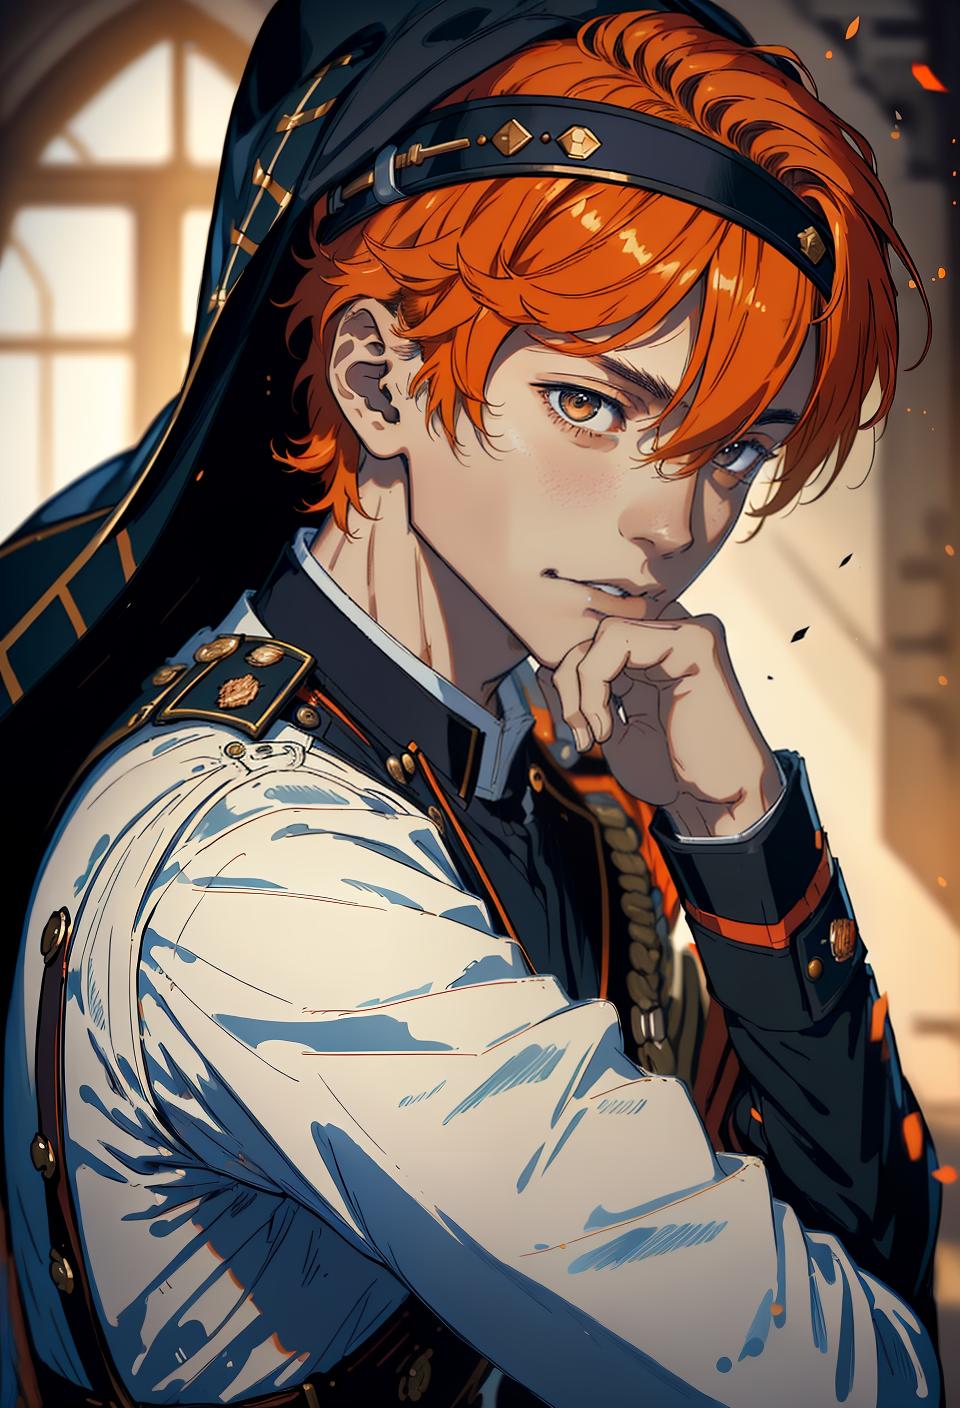  ((trending, highres, masterpiece, cinematic shot)), 1boy, young, male military uniform, medieval fantasy scene, short straight orange hair, side locks hairstyle,  dark eyes, gentle personality, relaxed expression, dark skin, lively, energetic